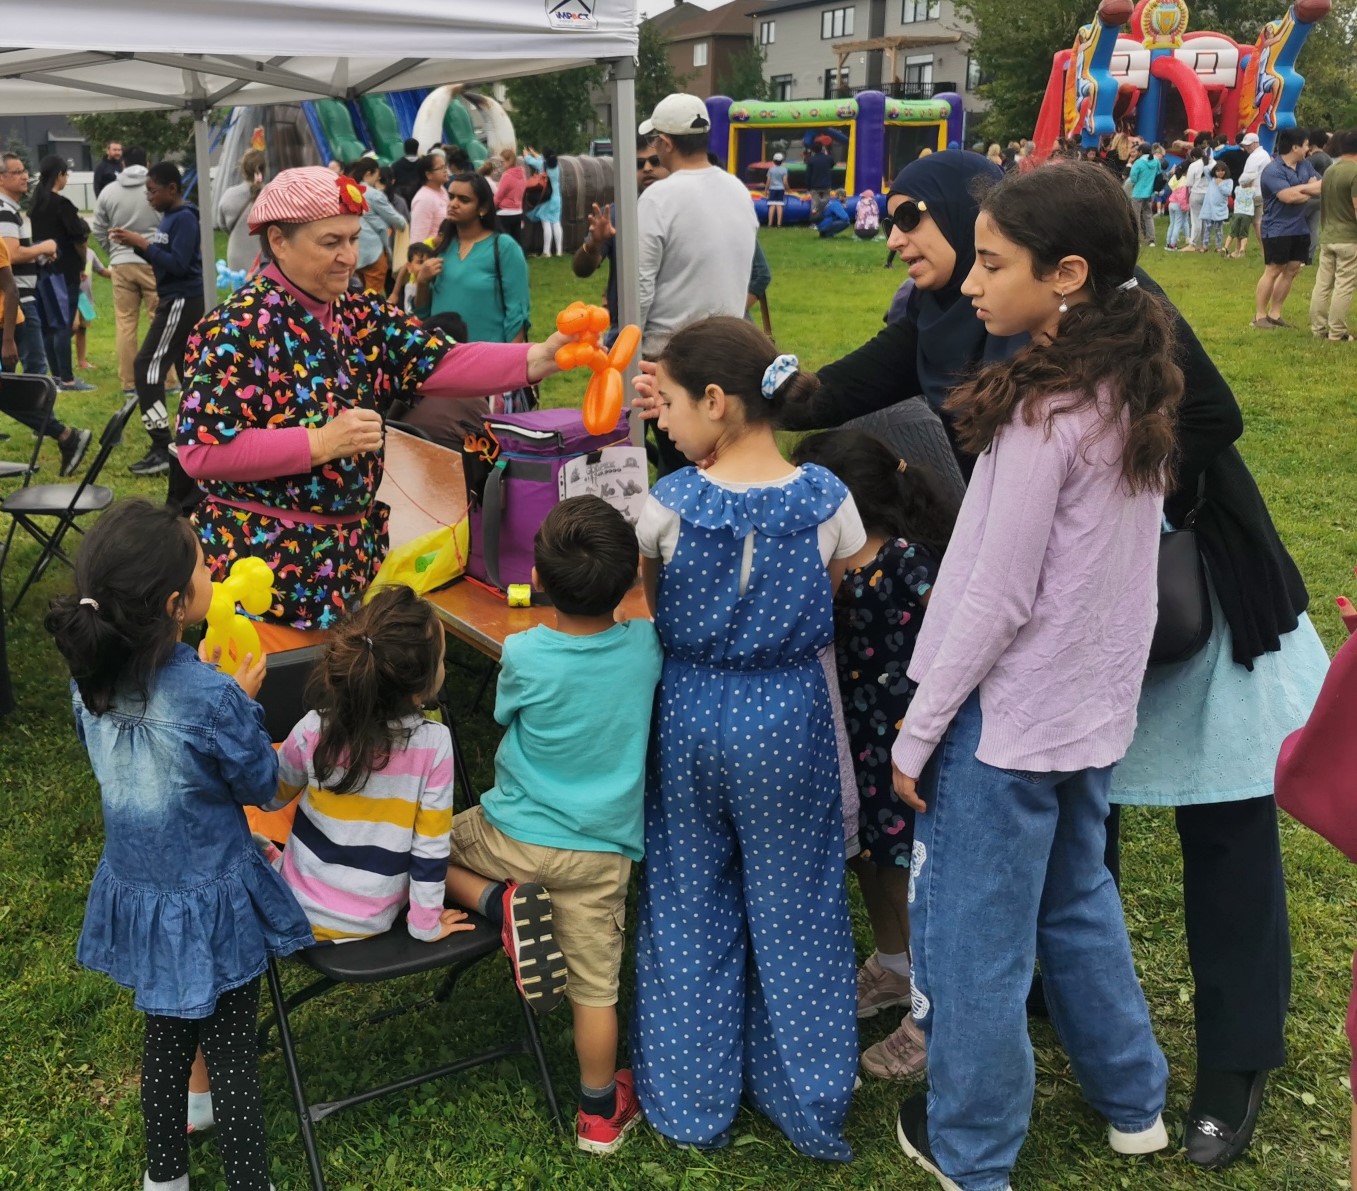 Half Moon Bay Family Day Biggest And Best Yet Barrhaven Independent